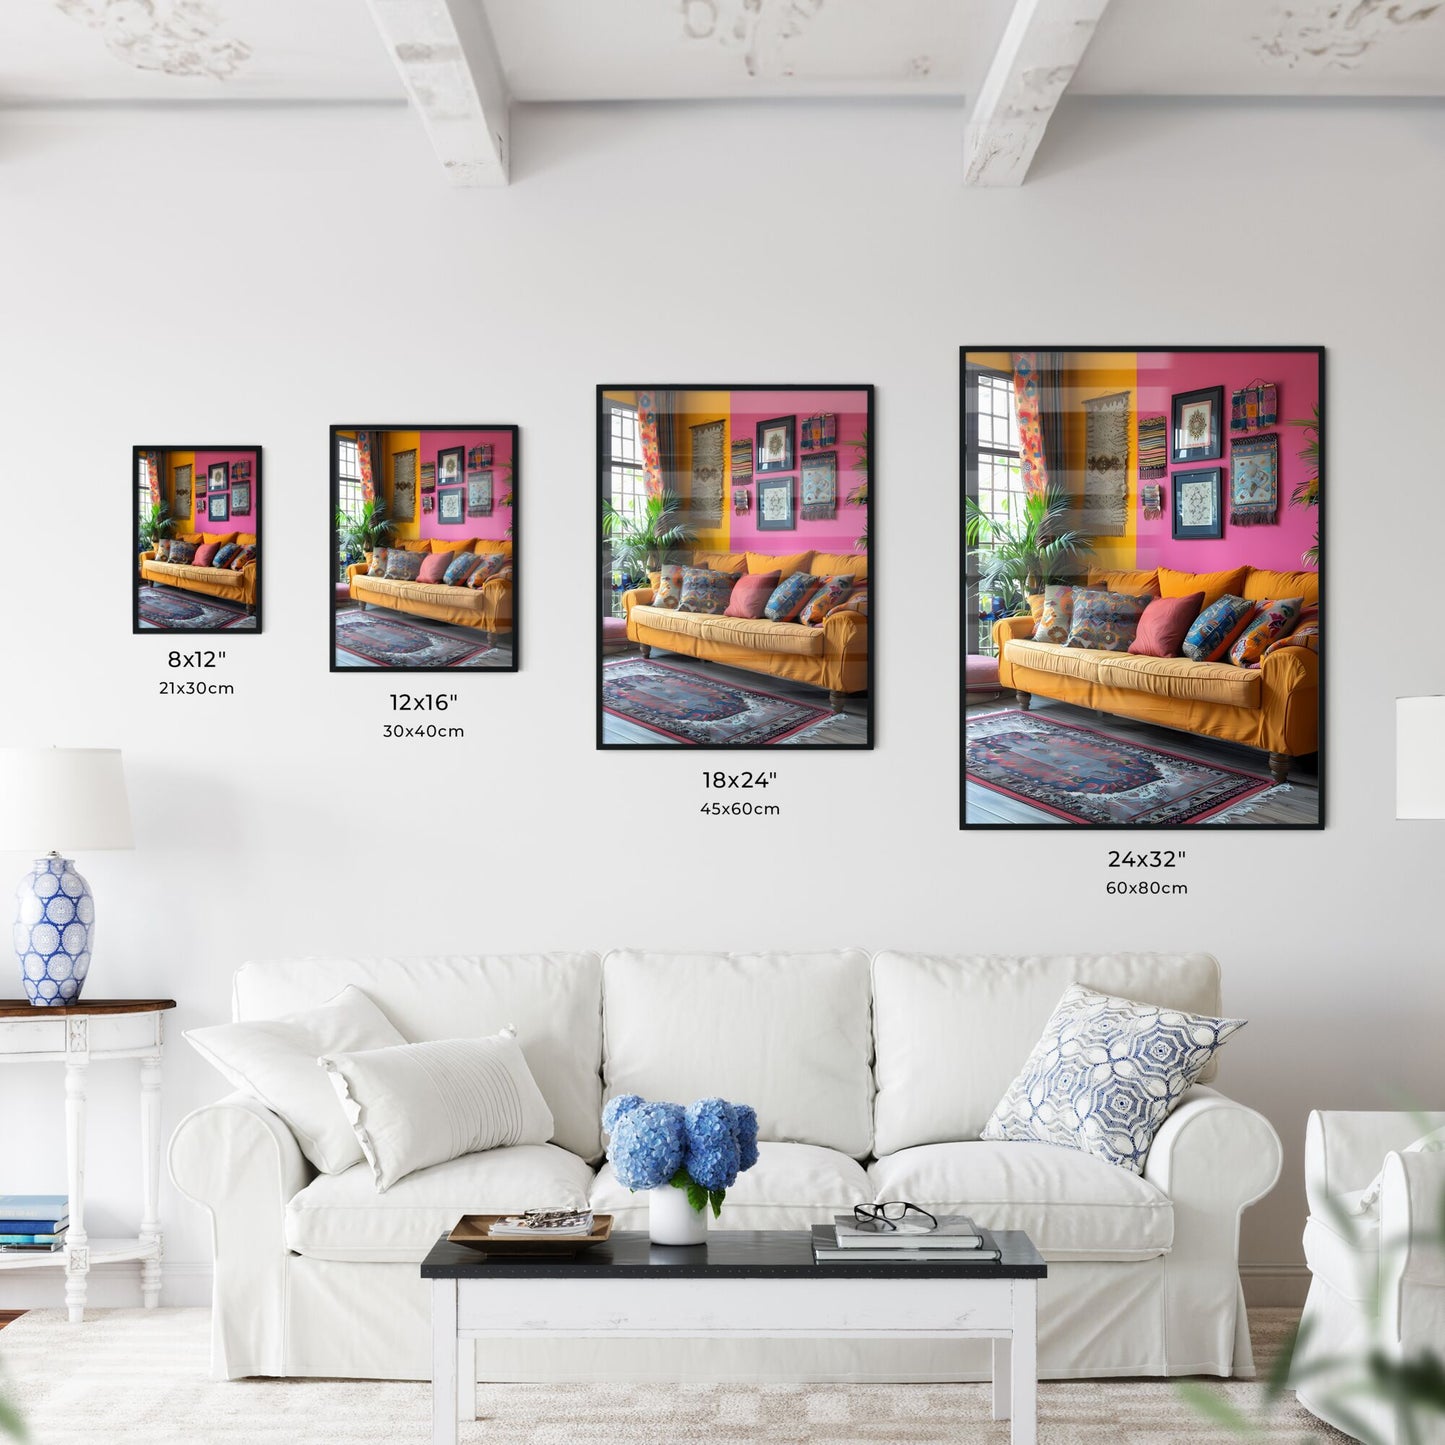 Colorful Bangladeshi Boho Art Painting: Couch with Pillows in Vibrant Pink Room with Rug Default Title